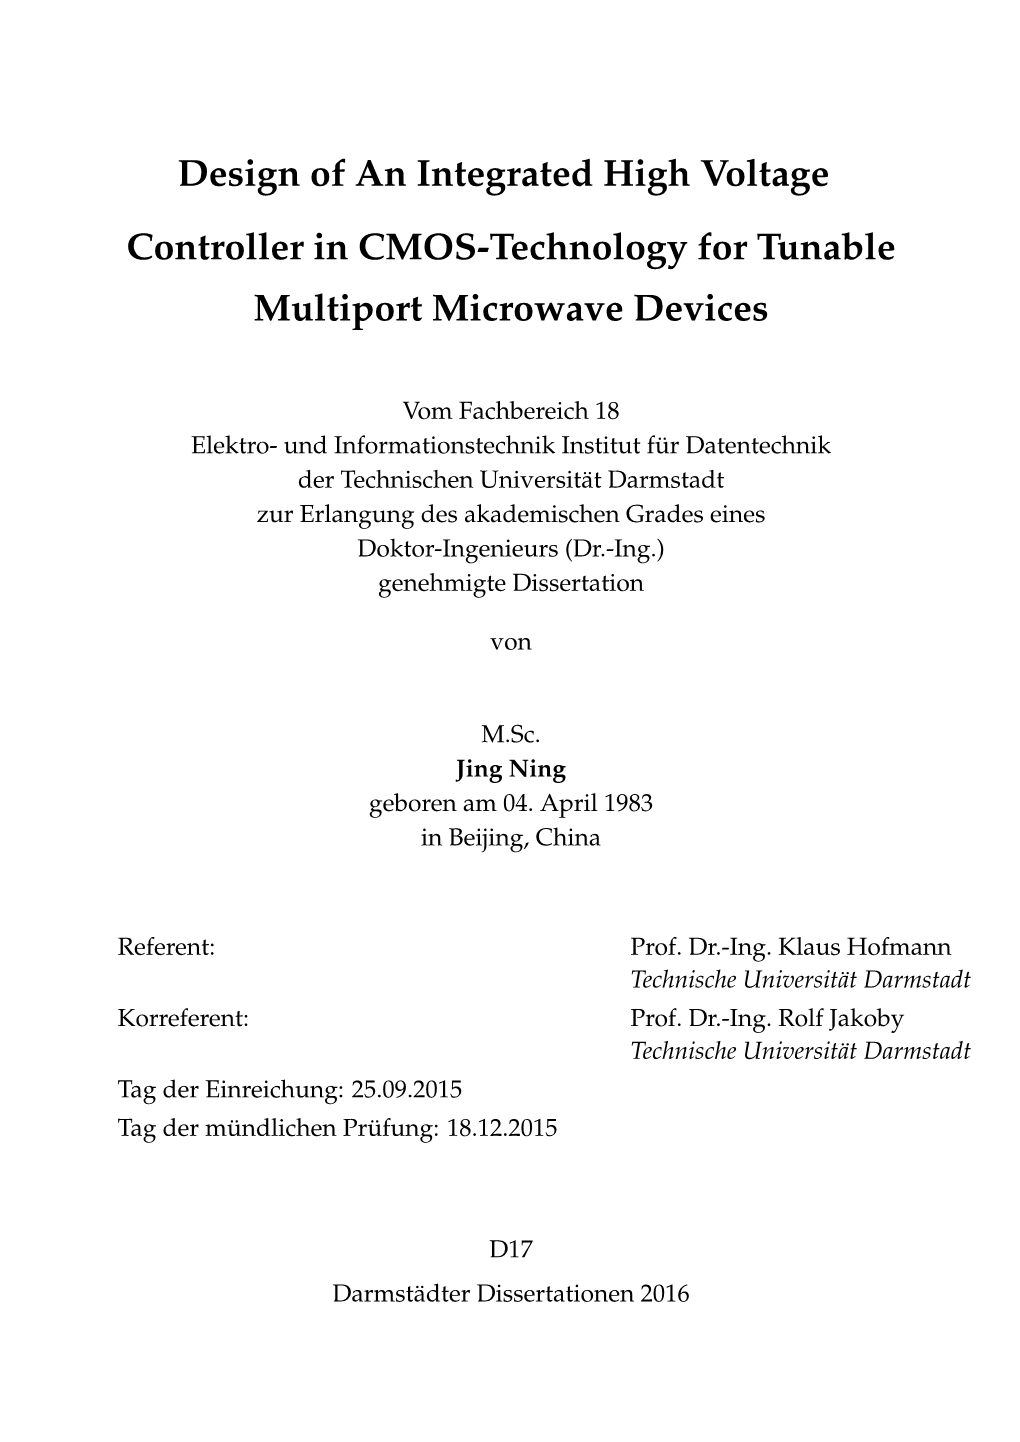 Design of an Integrated High Voltage Controller in CMOS-Technology for Tunable Multiport Microwave Devices